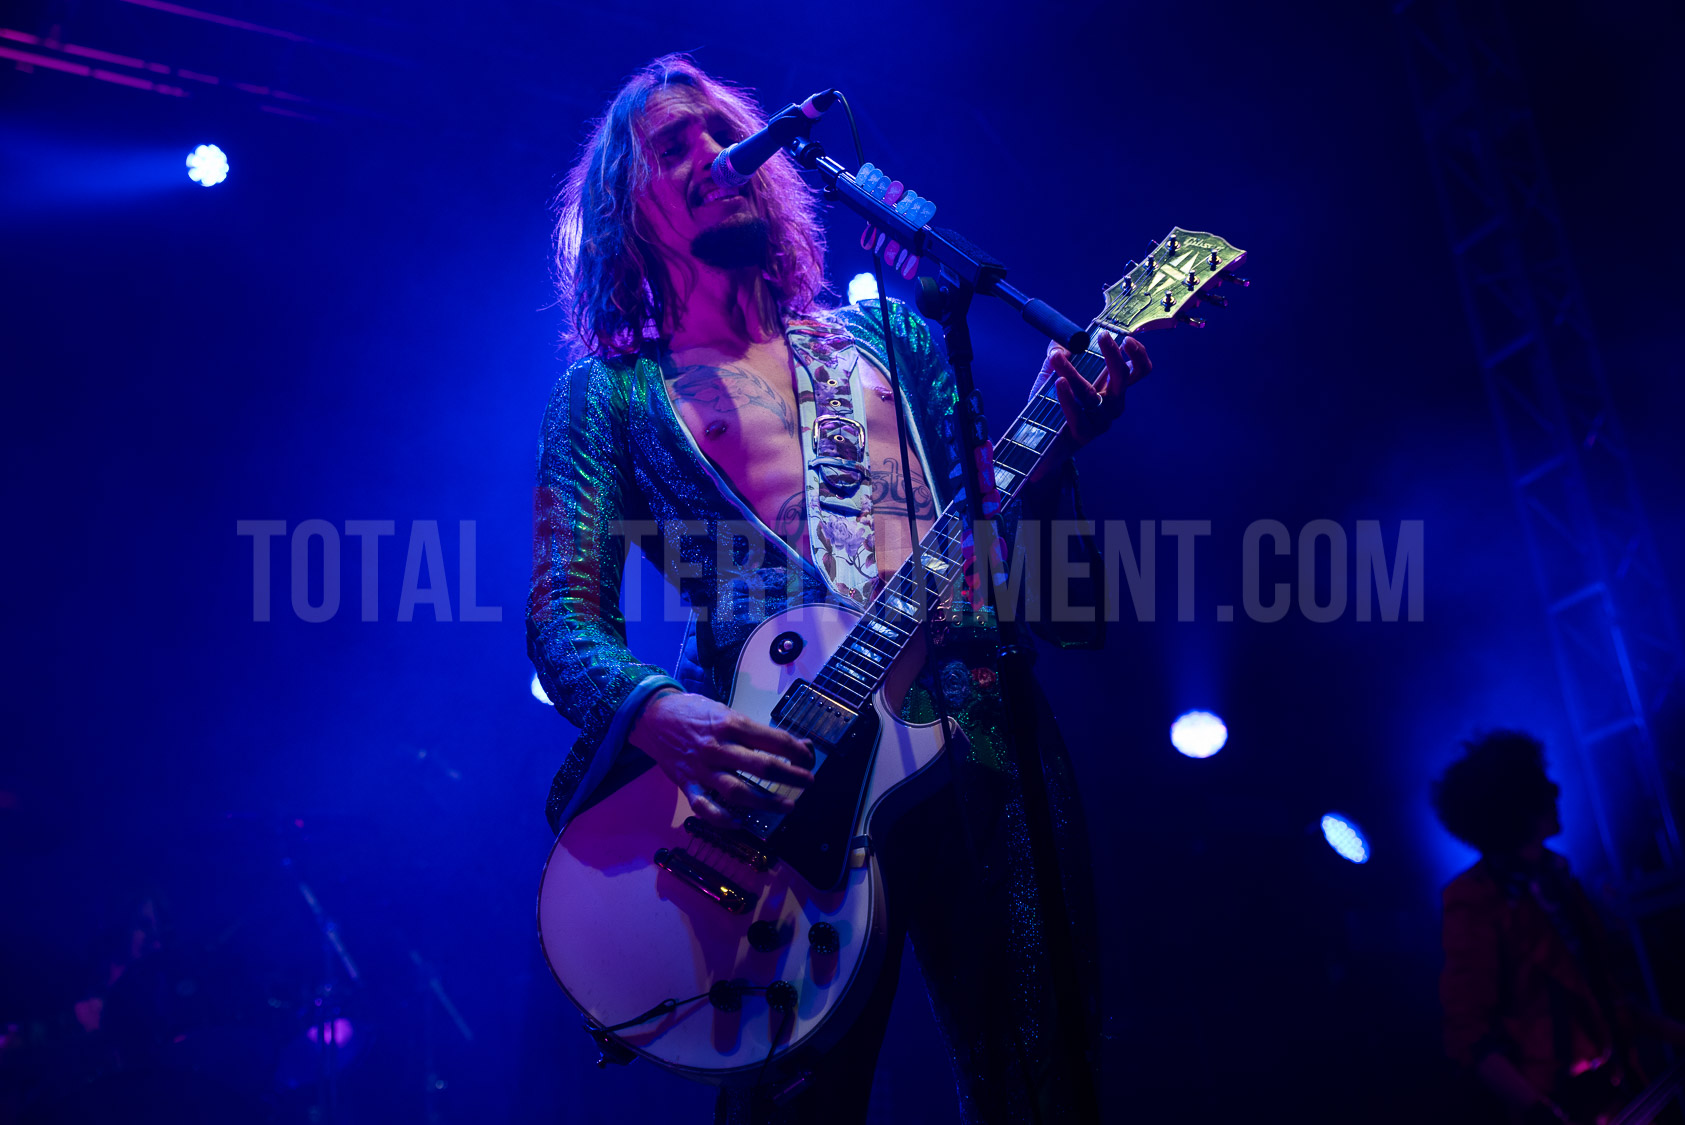 The Darkness, Leeds, O2 Academy, Graham Finney, music, totalntertainment